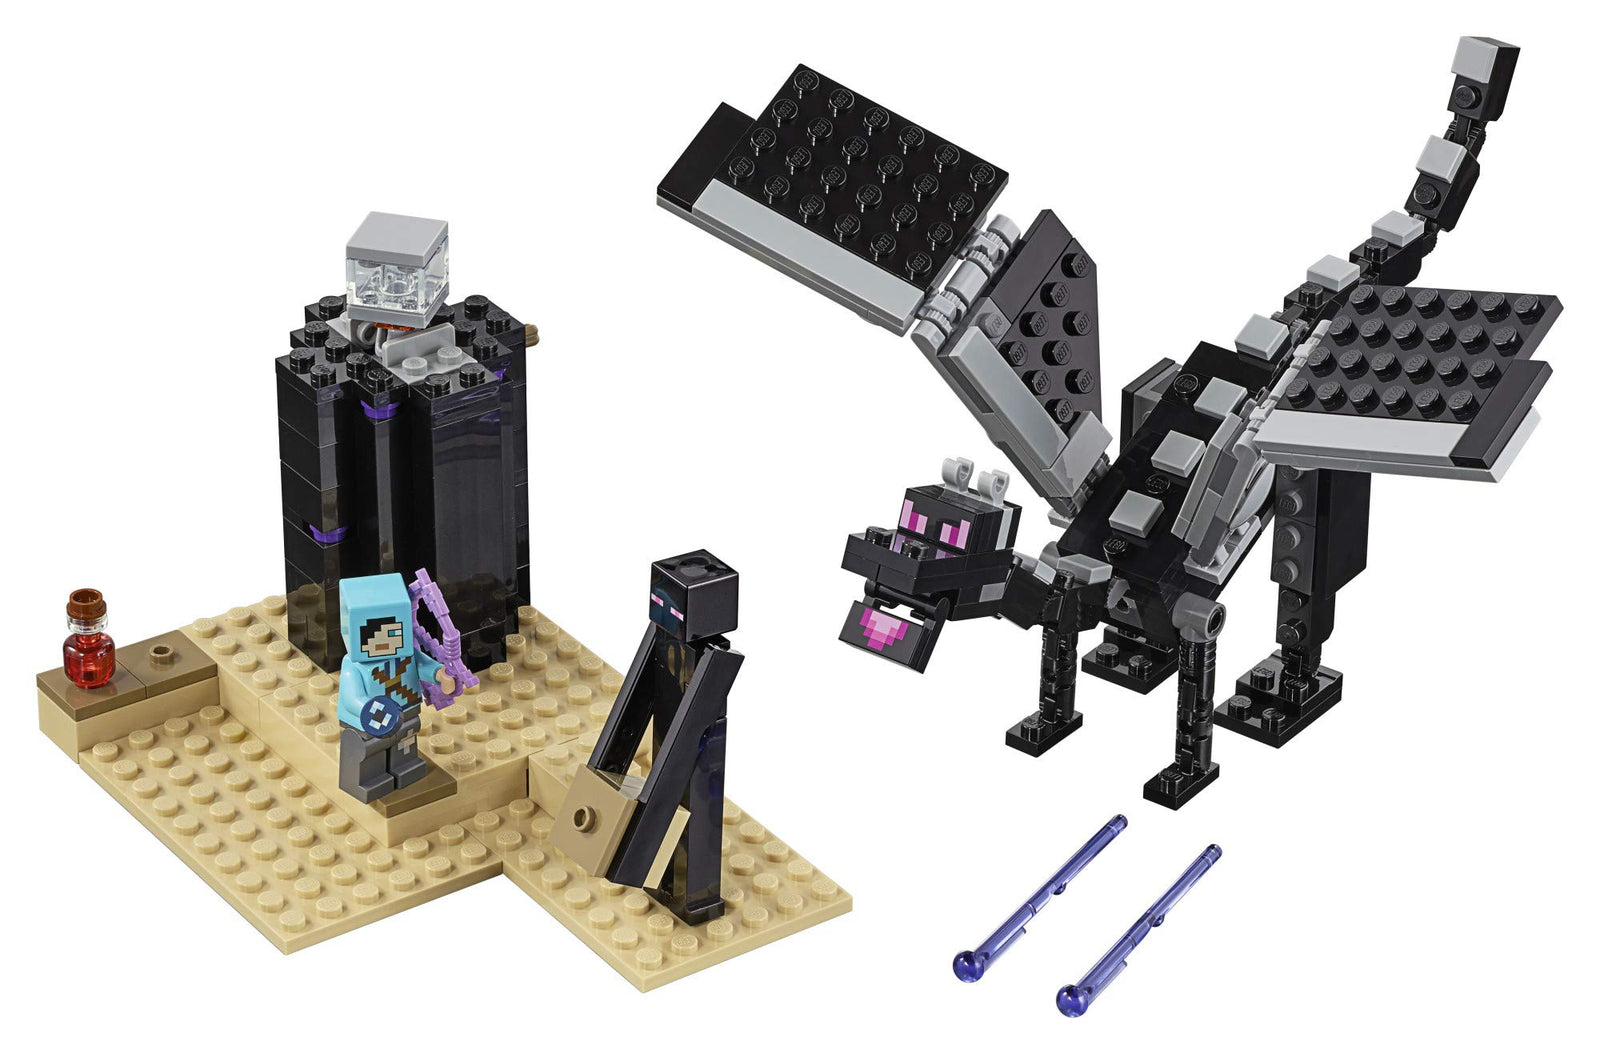 LEGO Minecraft The End Battle 21151 Ender Dragon Building Kit Includes Dragon Slayer and Enderman Toy Figures for Dragon Fighting Adventures (222 Pieces)